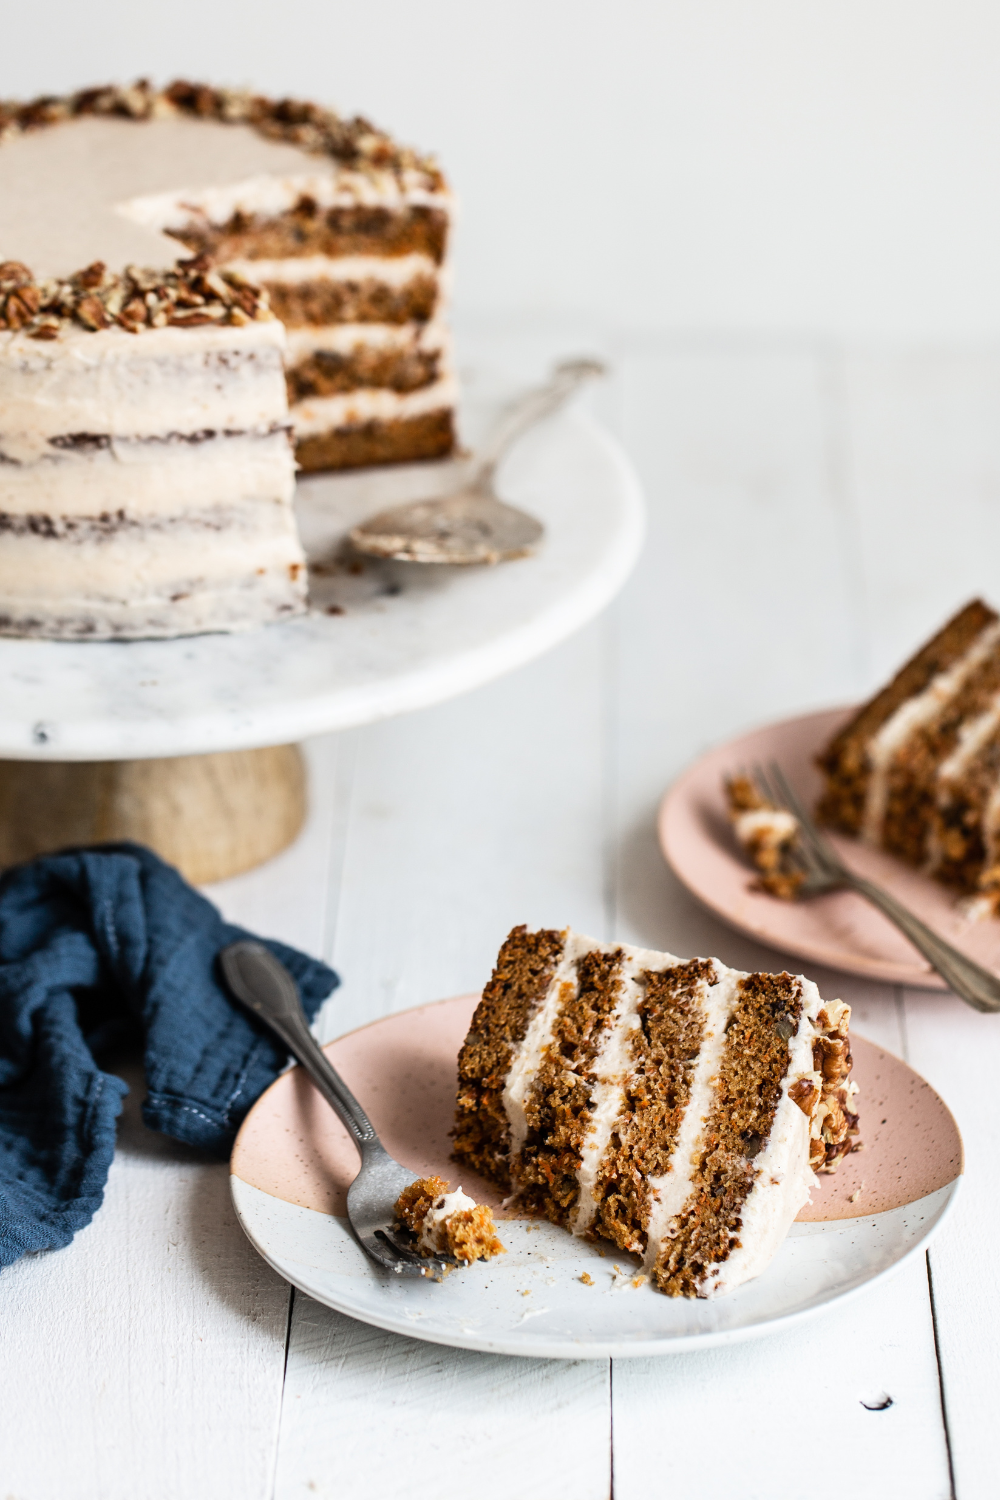 the whole carrot cake on a cake stand, with a slice taken out and on a plate to serve.